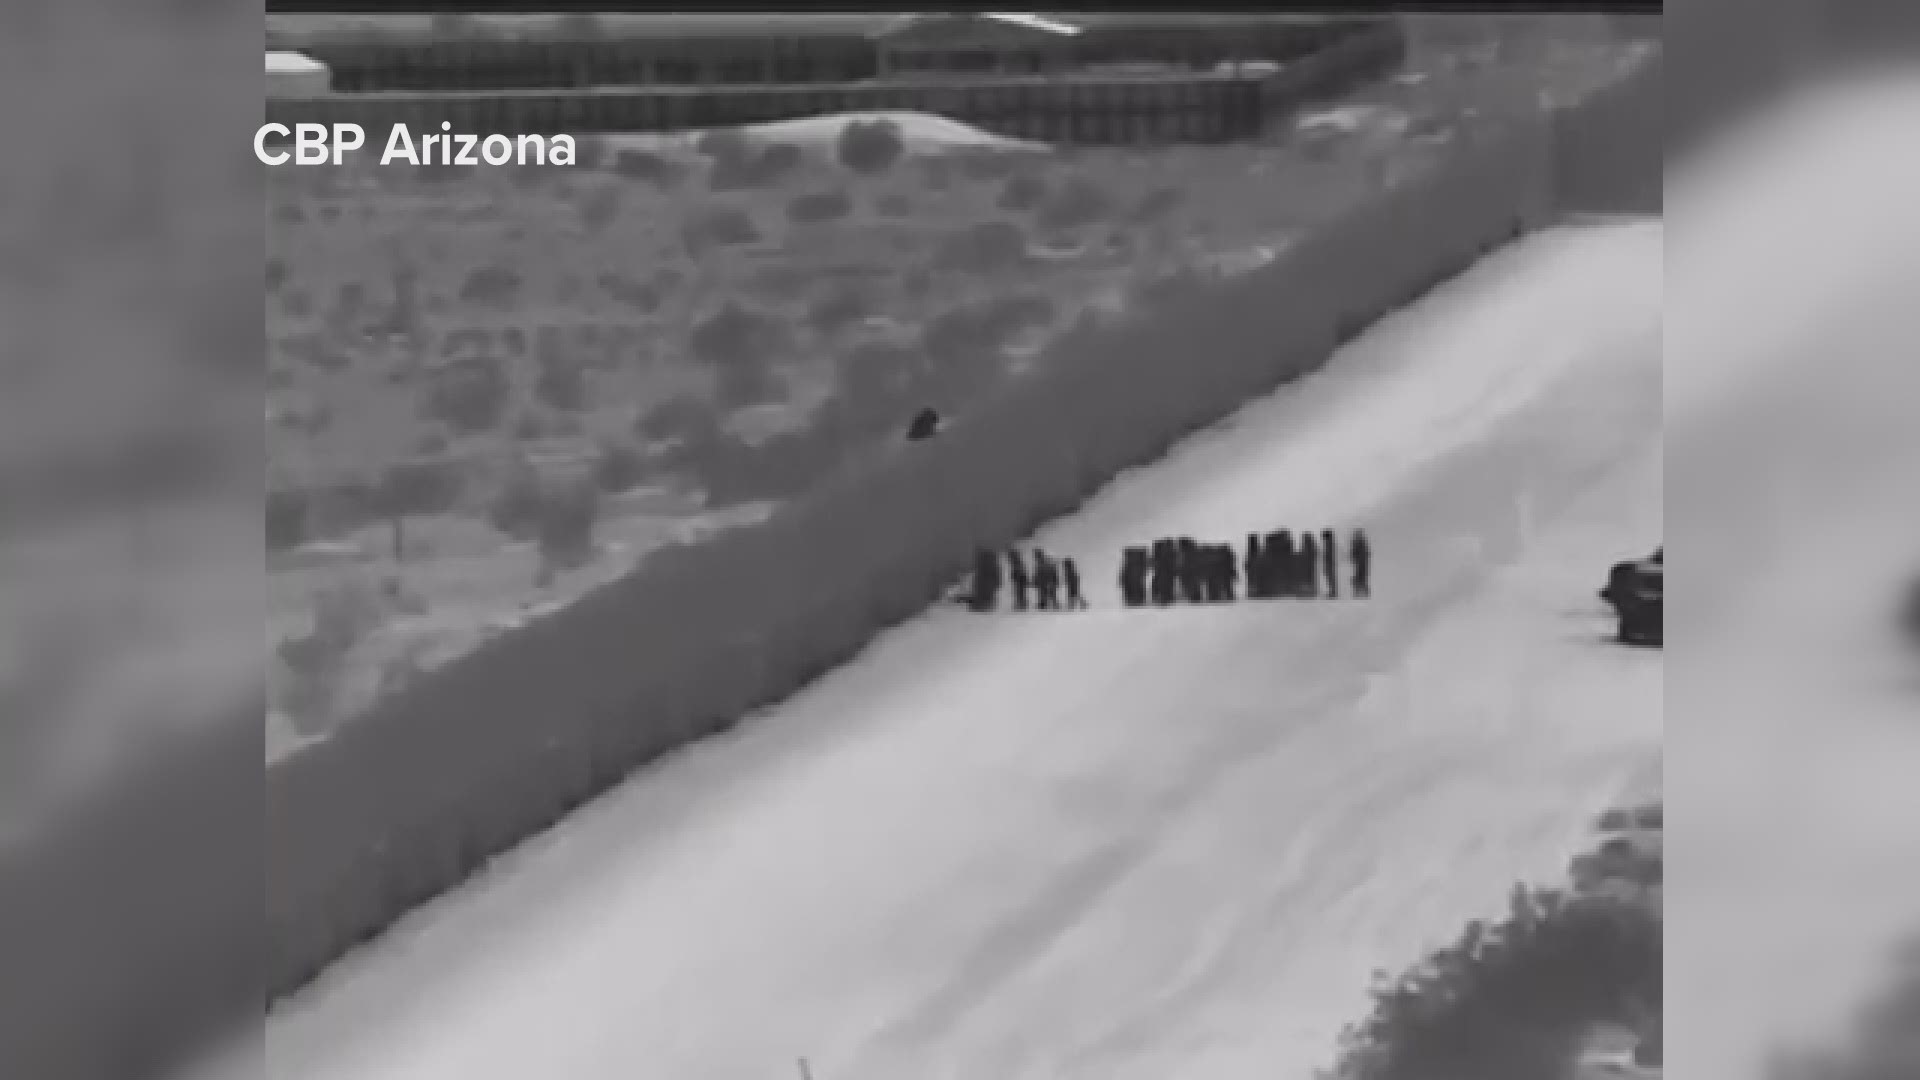 Customs and Border Protection Arizona tweeted this video today showing 100+ Central Americans illegally scaling the border wall. CBP Arizona says Yuma sector border patrol agents apprehended the group after scaling the wall with a ladder and help from a smuggler.